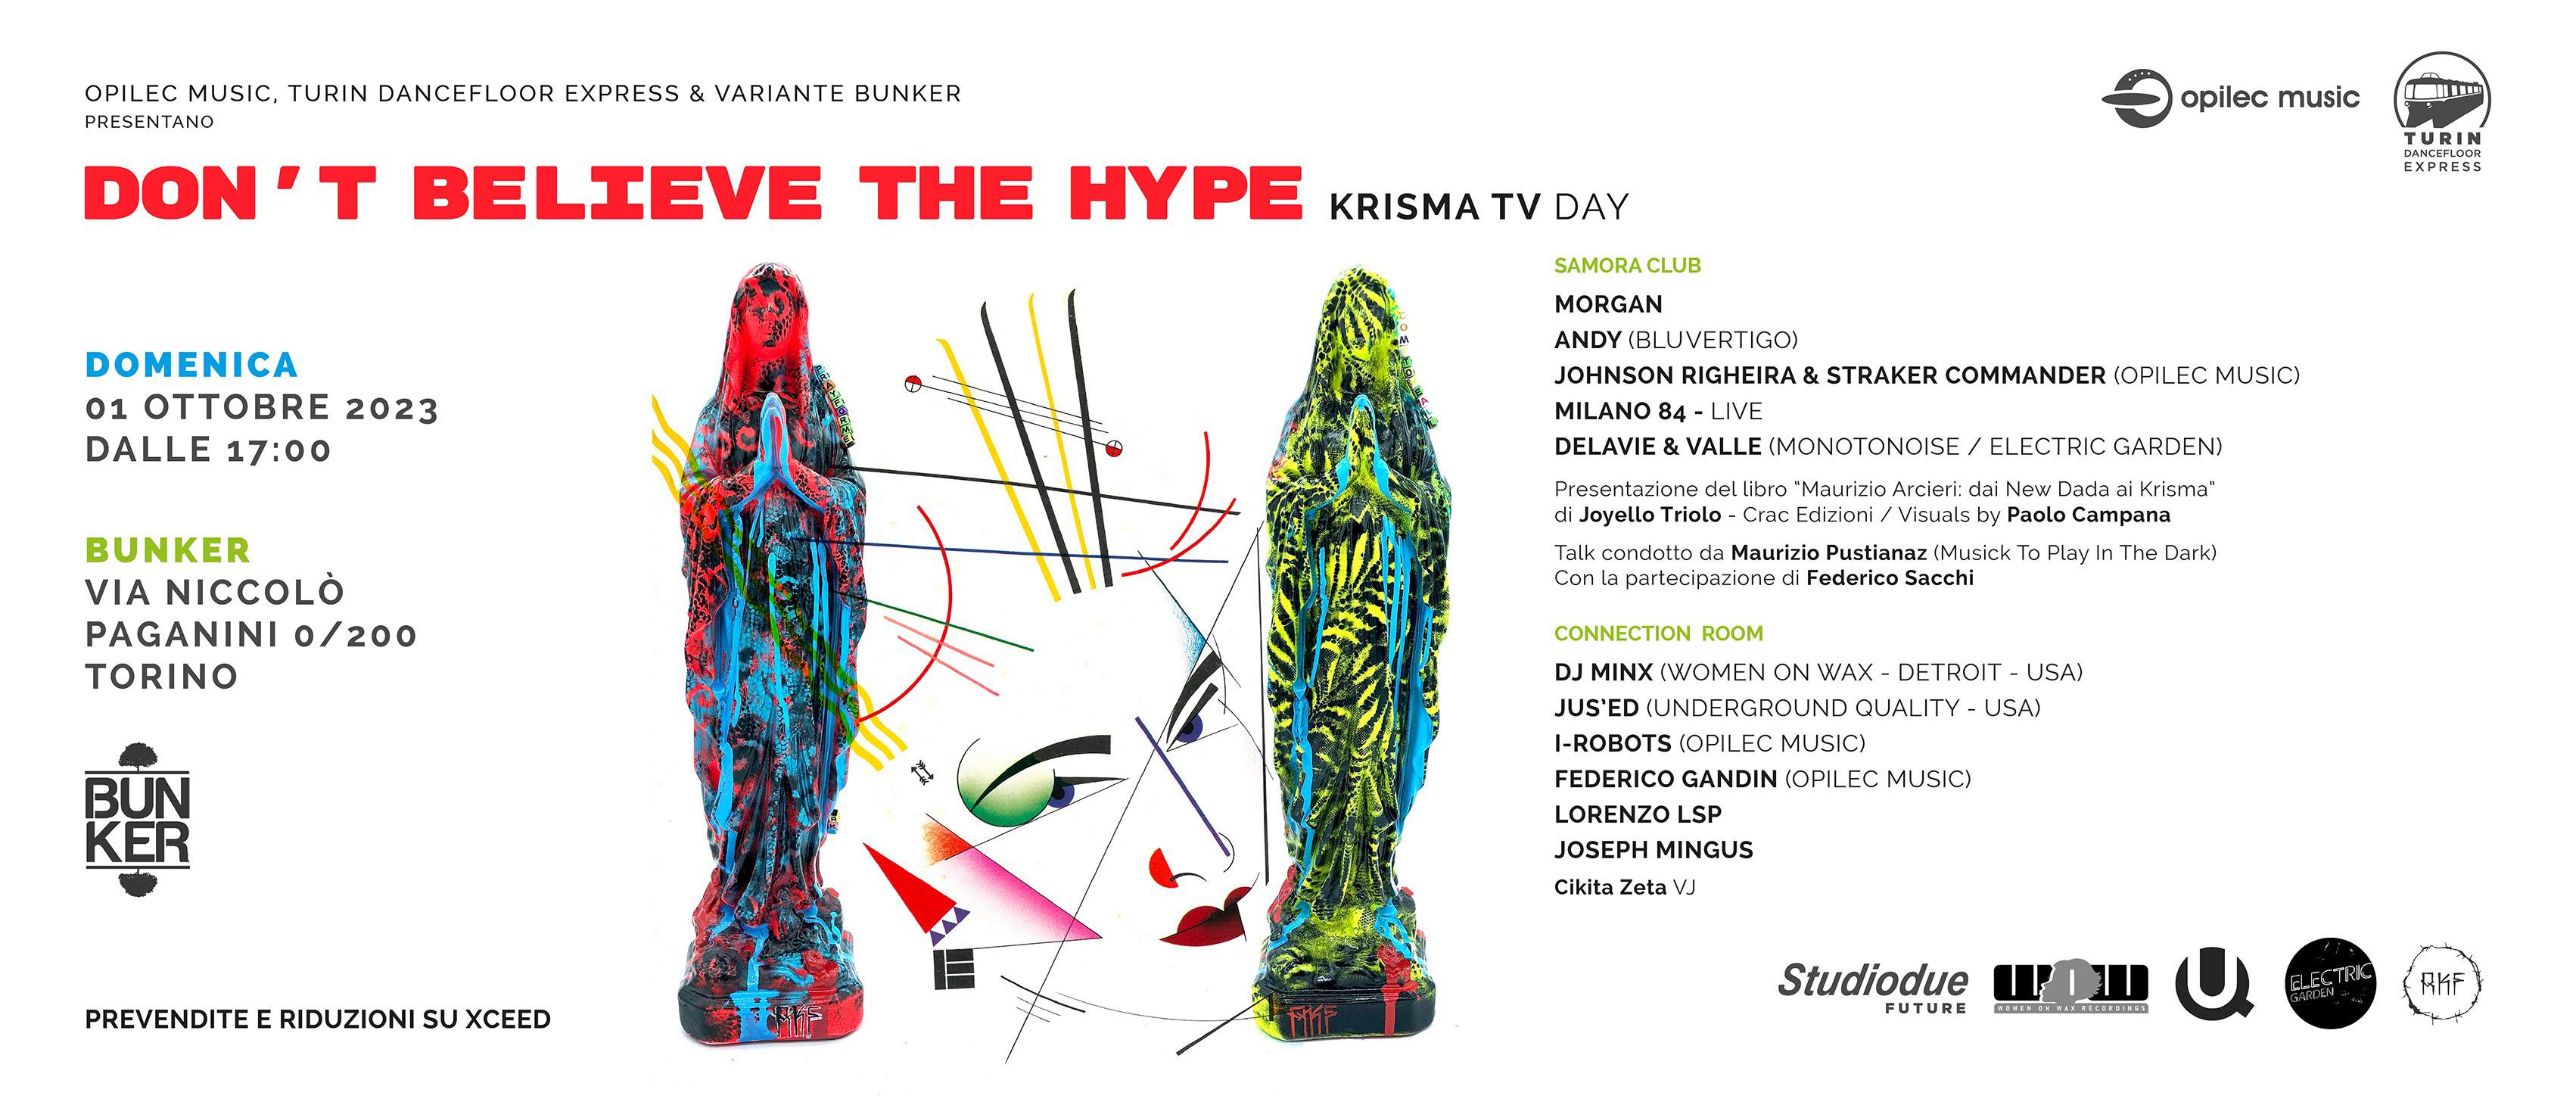 DON'T BELIEVE THE HYPE - KRISMA TV DAY - Página frontal